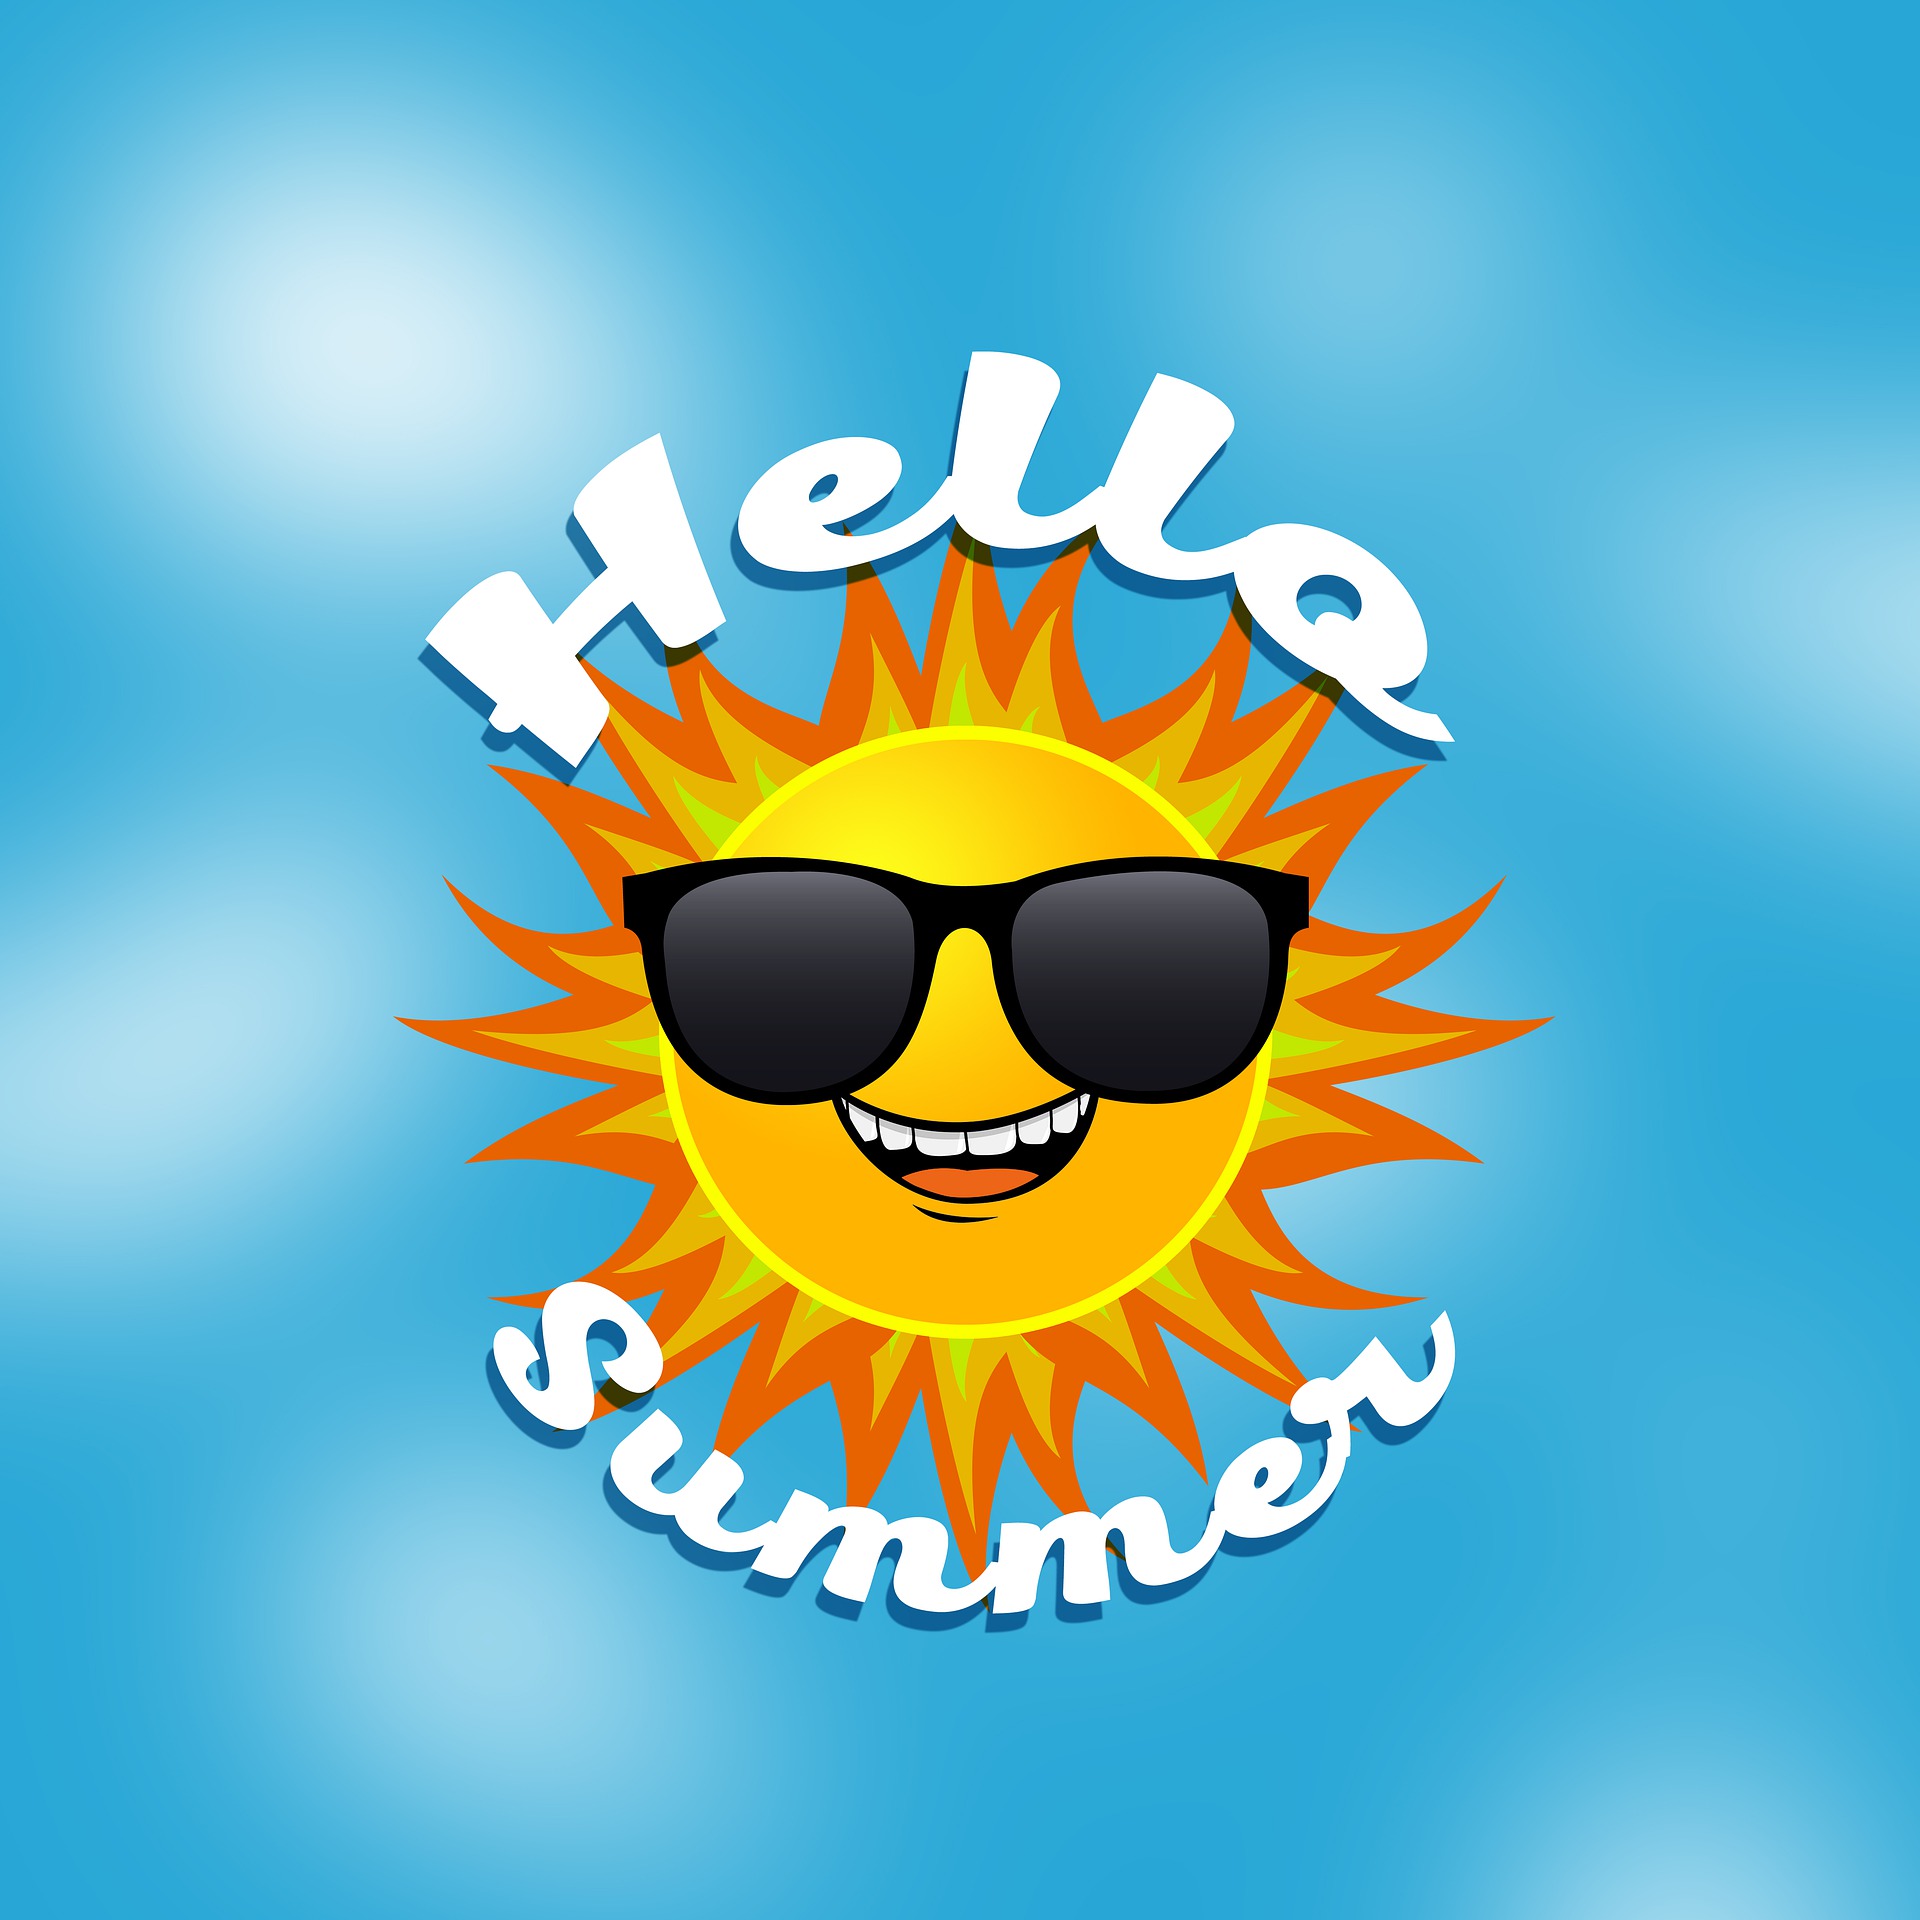 Summer sun with sunglasses and text "Hello Summer"